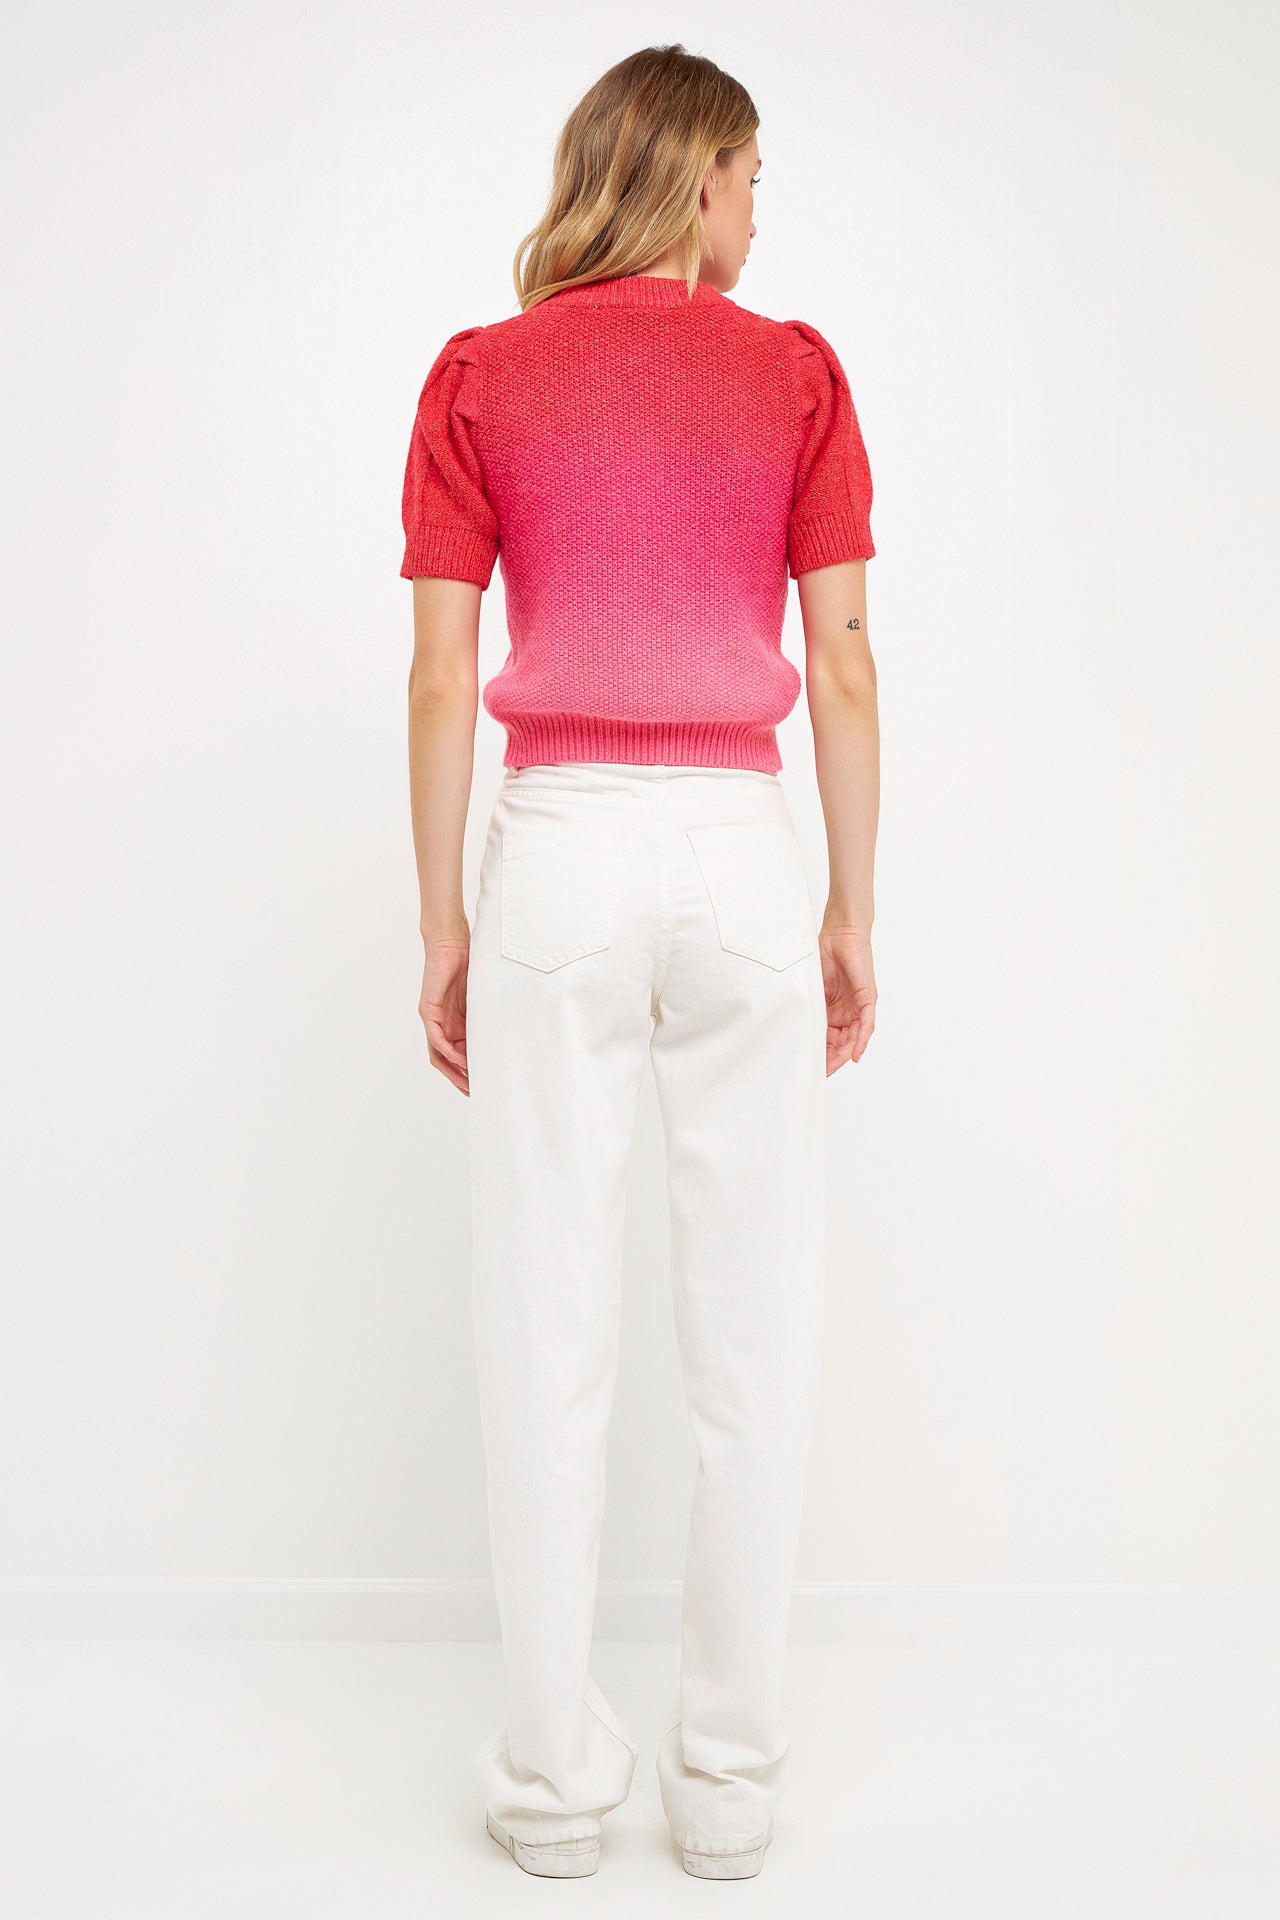 ENGLISH FACTORY - Ombre Sweater Top - TOPS available at Objectrare